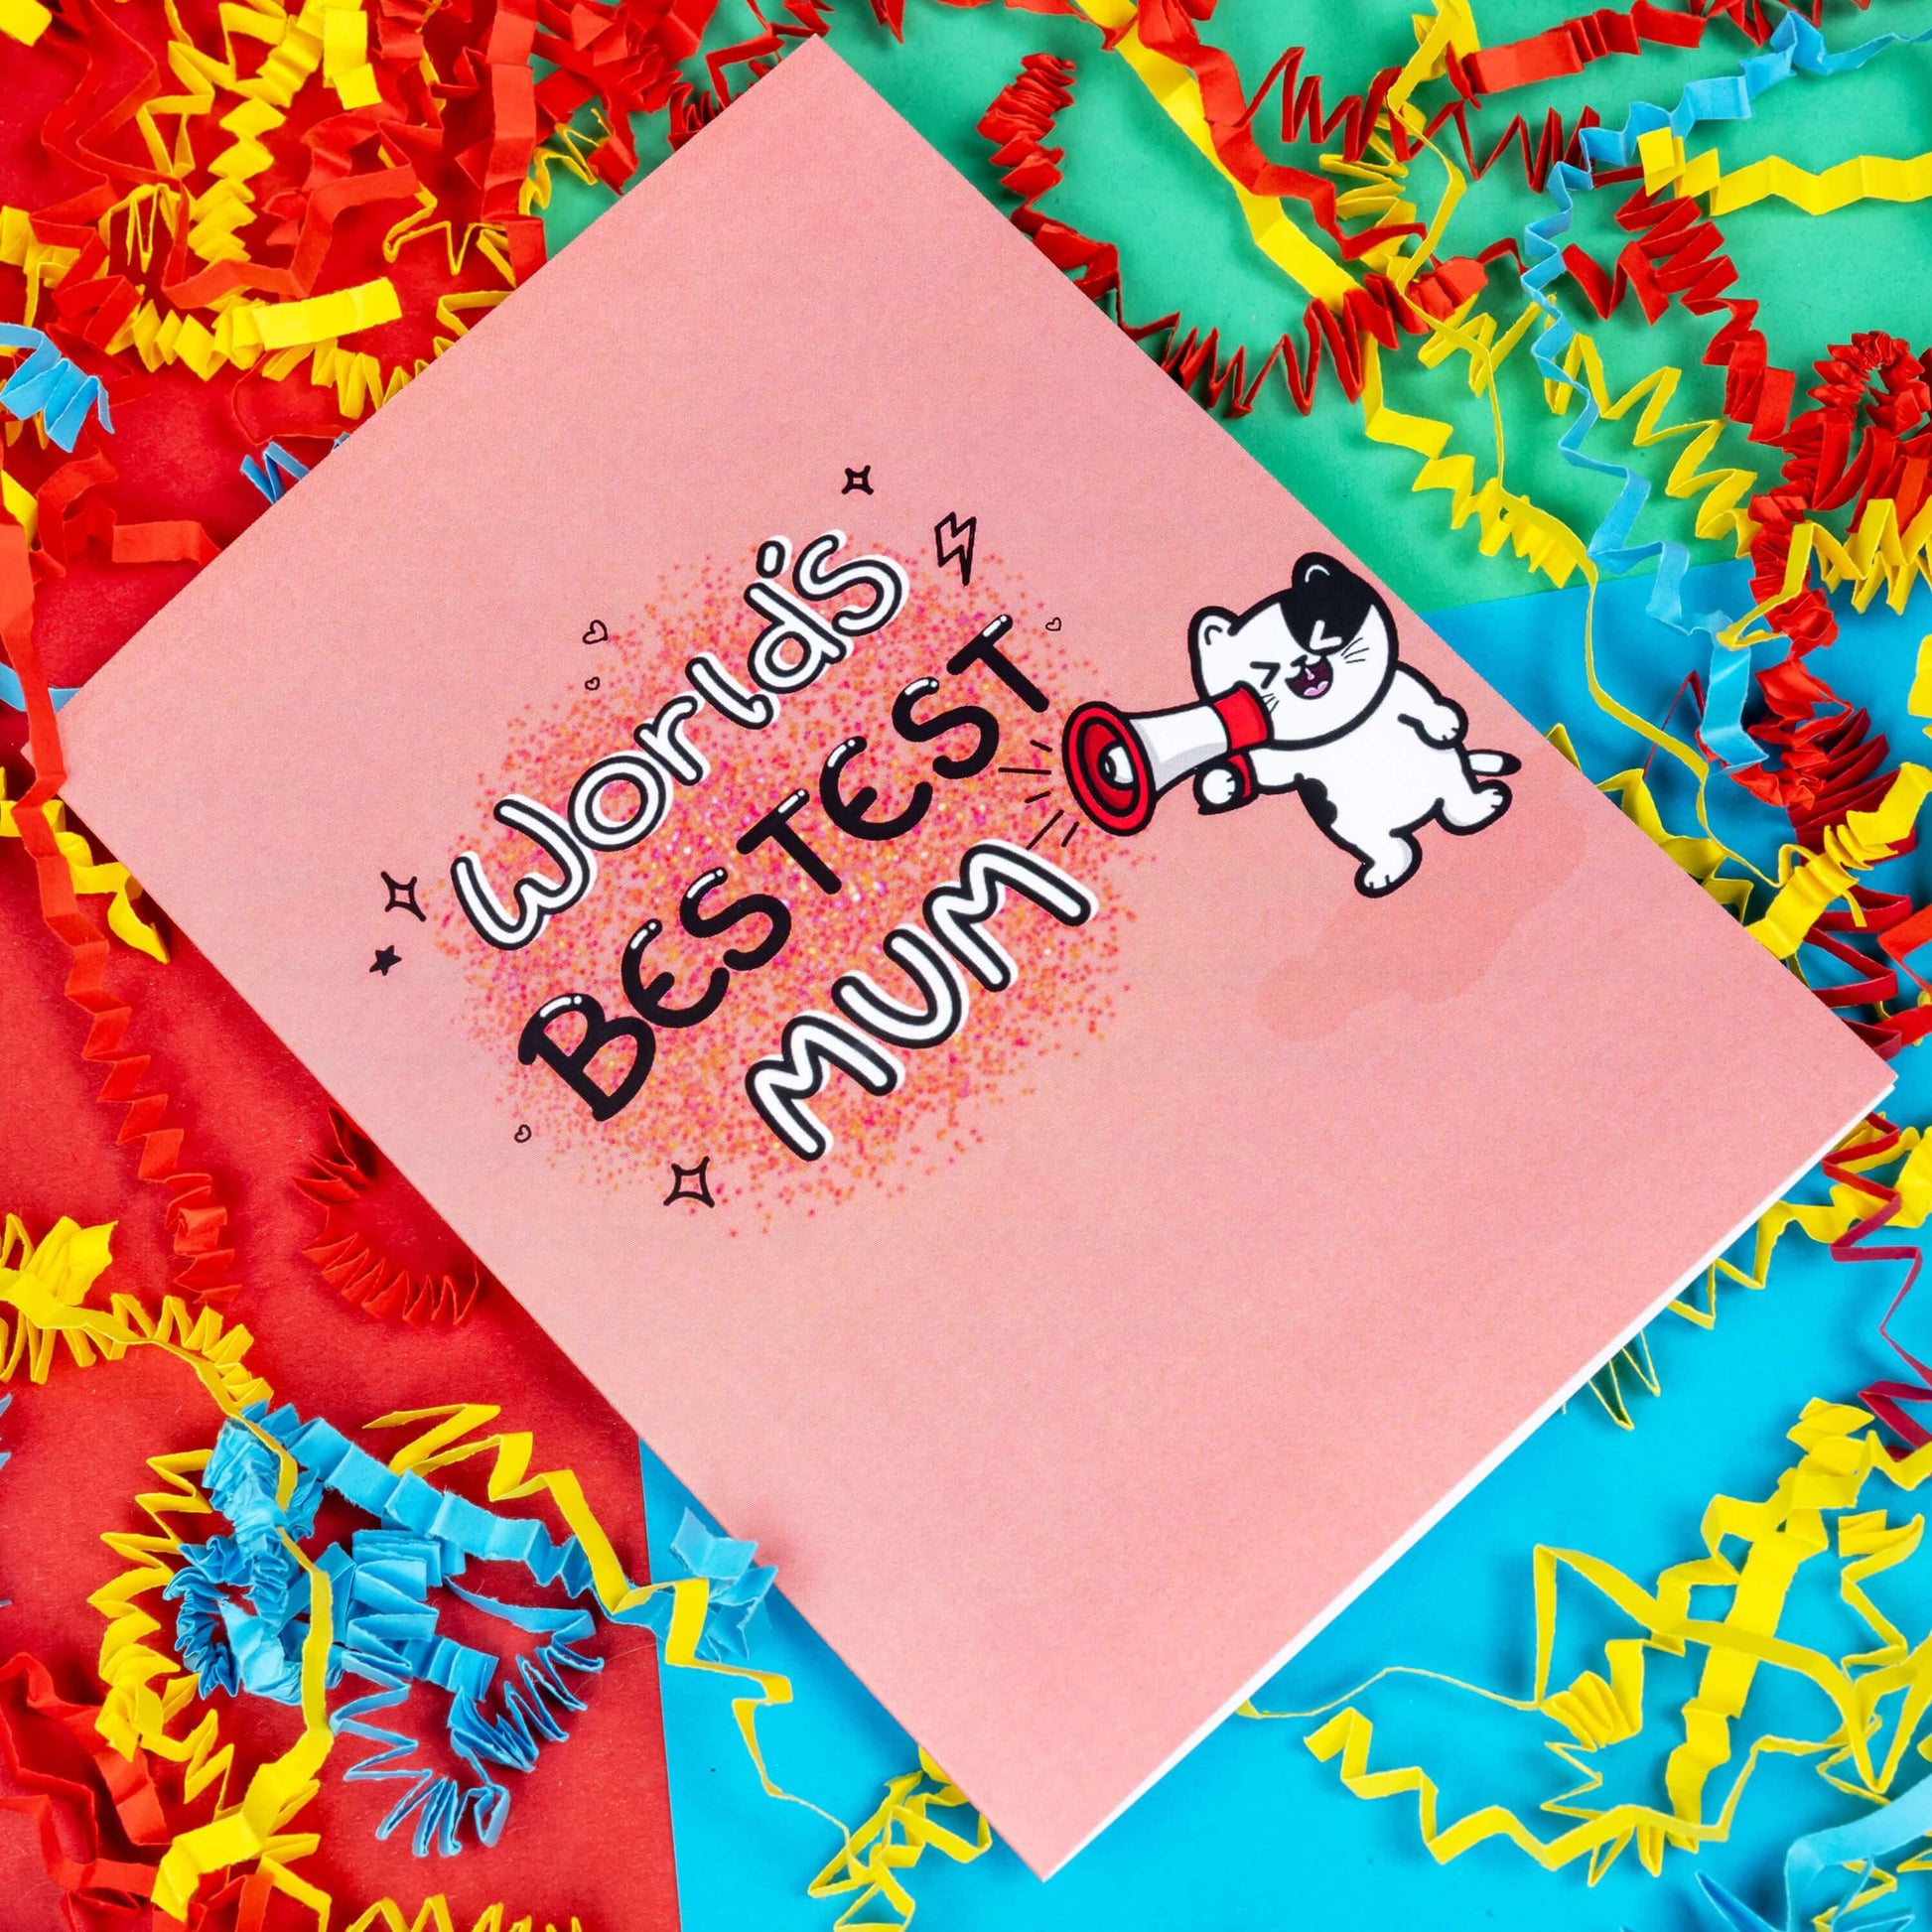 The World's Bestest Mum Cat Card on a red, blue and green background with red, yellow and blue crinkle card confetti. The pink a6 mother's day card features pink, orange and yellow dotwork background with white and black doodle text reading 'world's bestest mum'. Next to the text is a smiling black and white cat shouting through a megaphone.